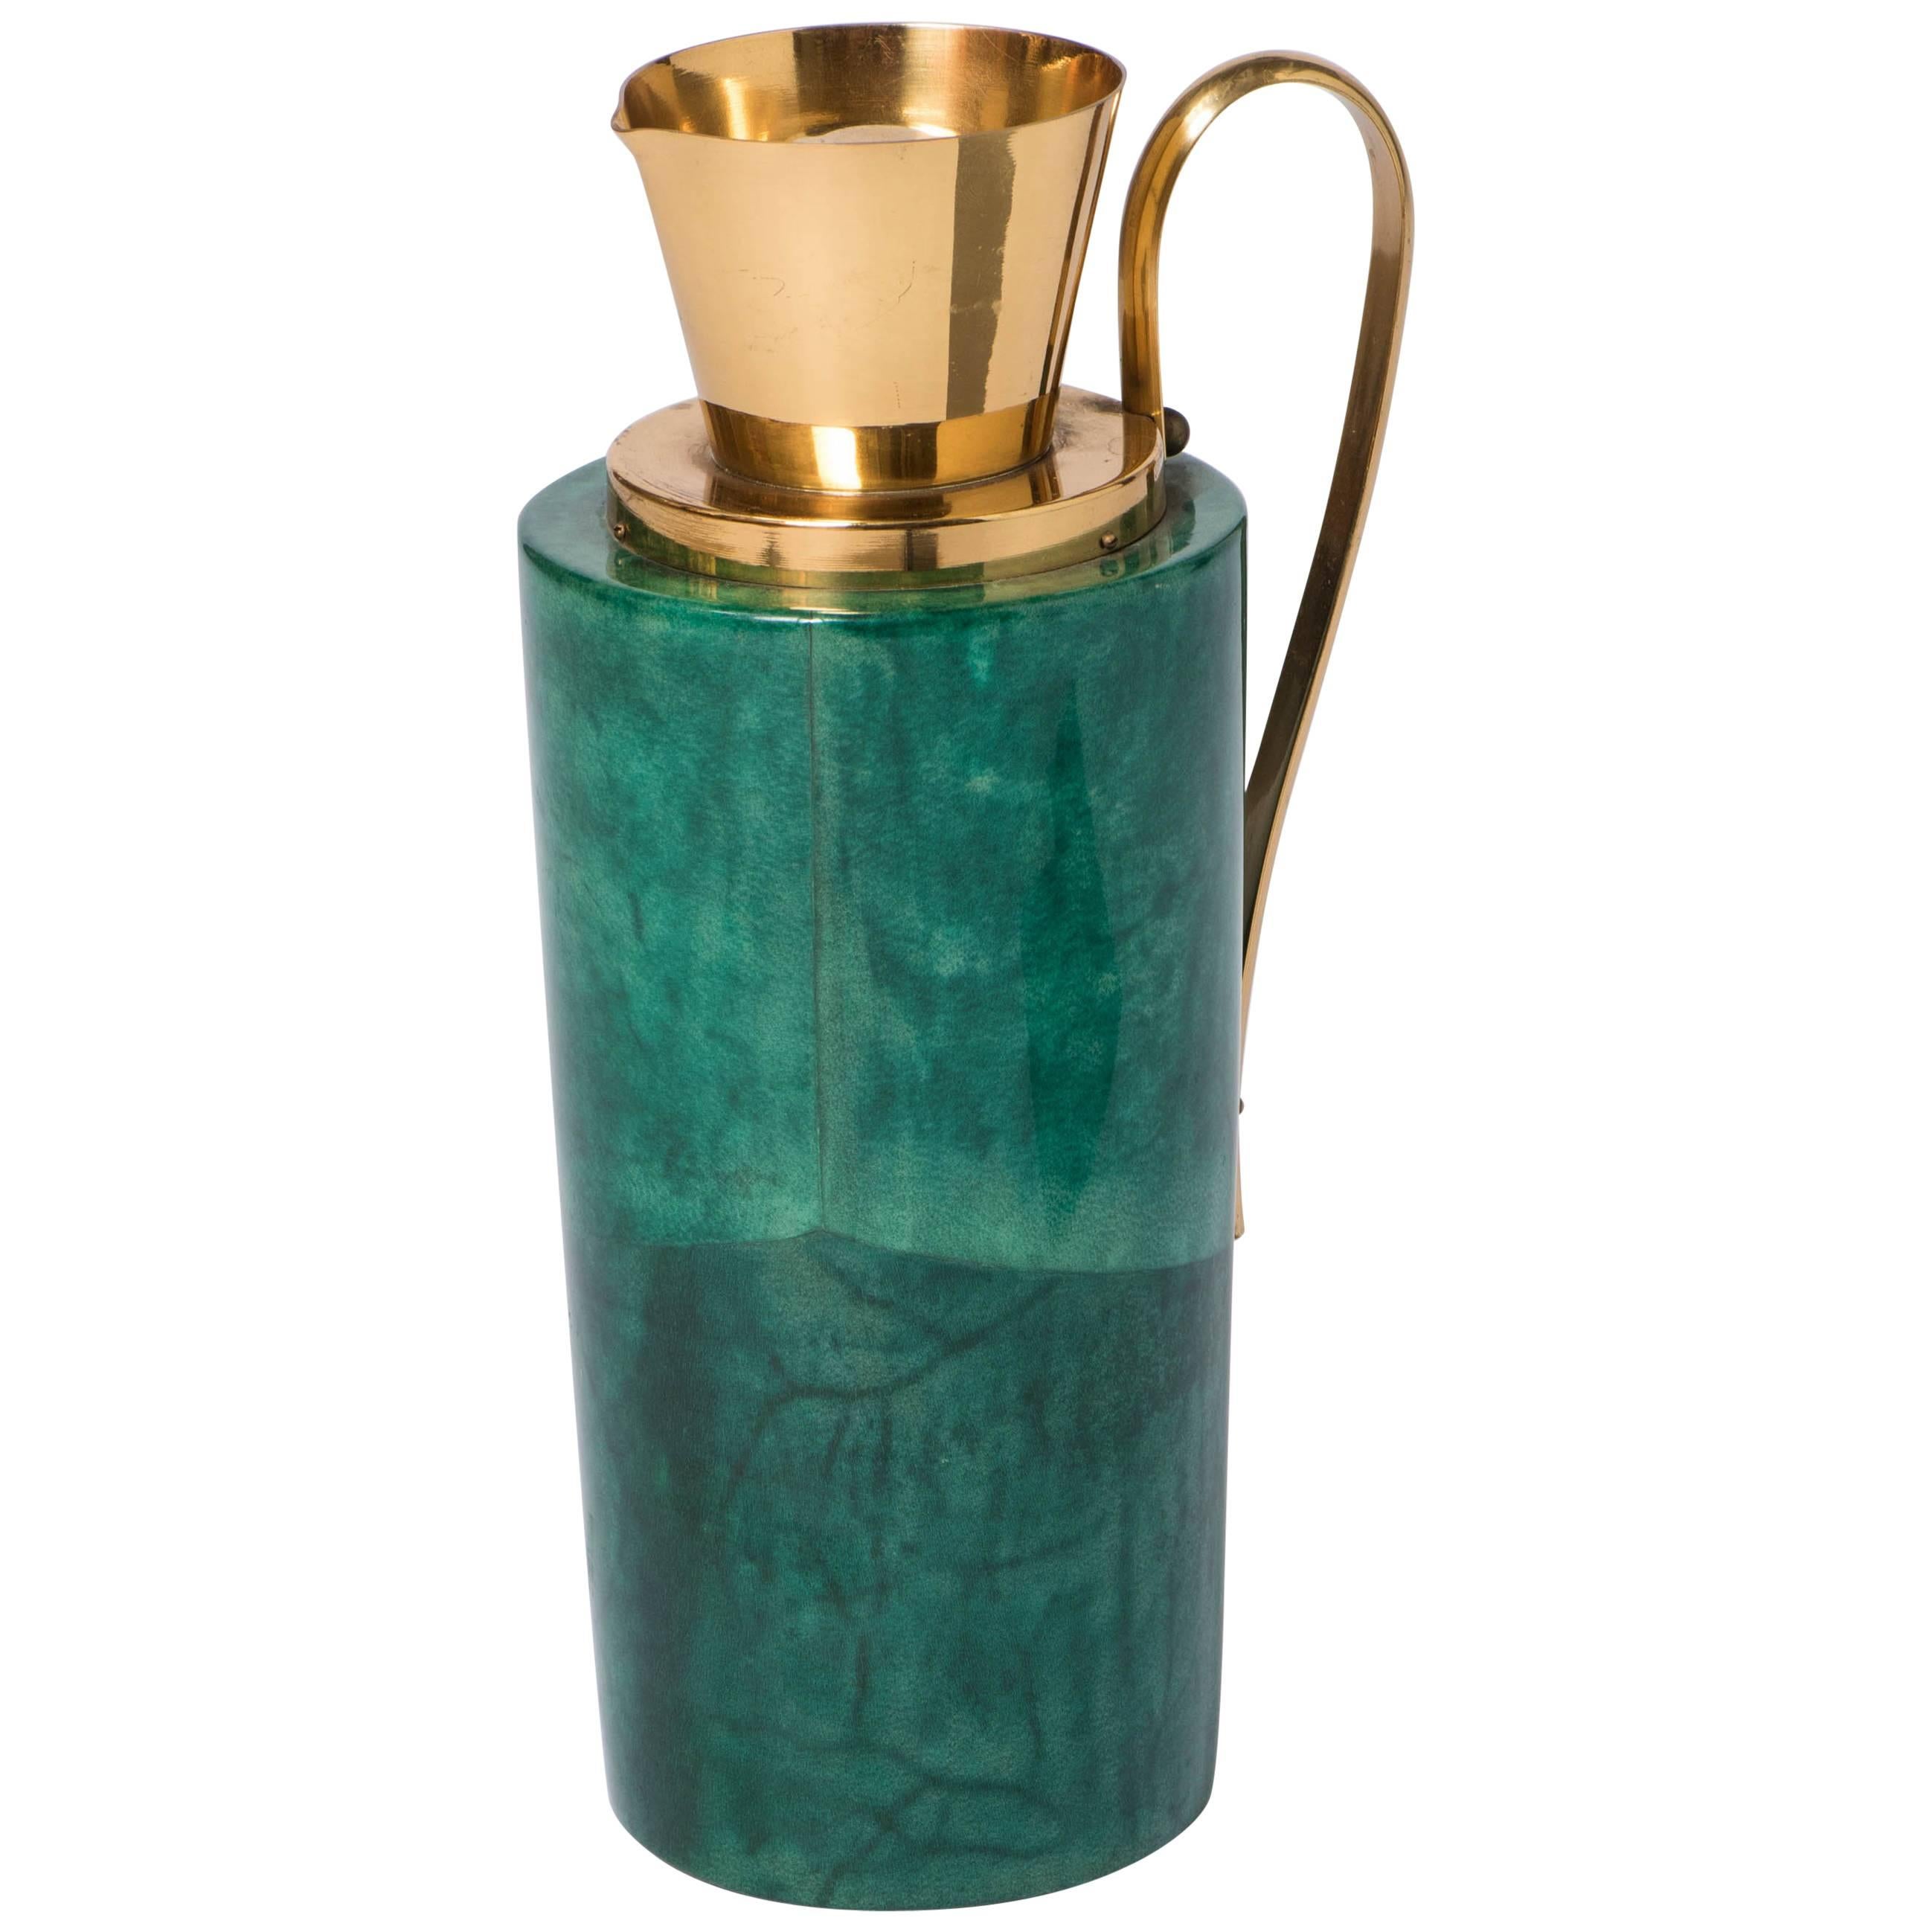 Aldo Tura green lacquered parchment carafe with brass mounts, Italy circa 1940 For Sale